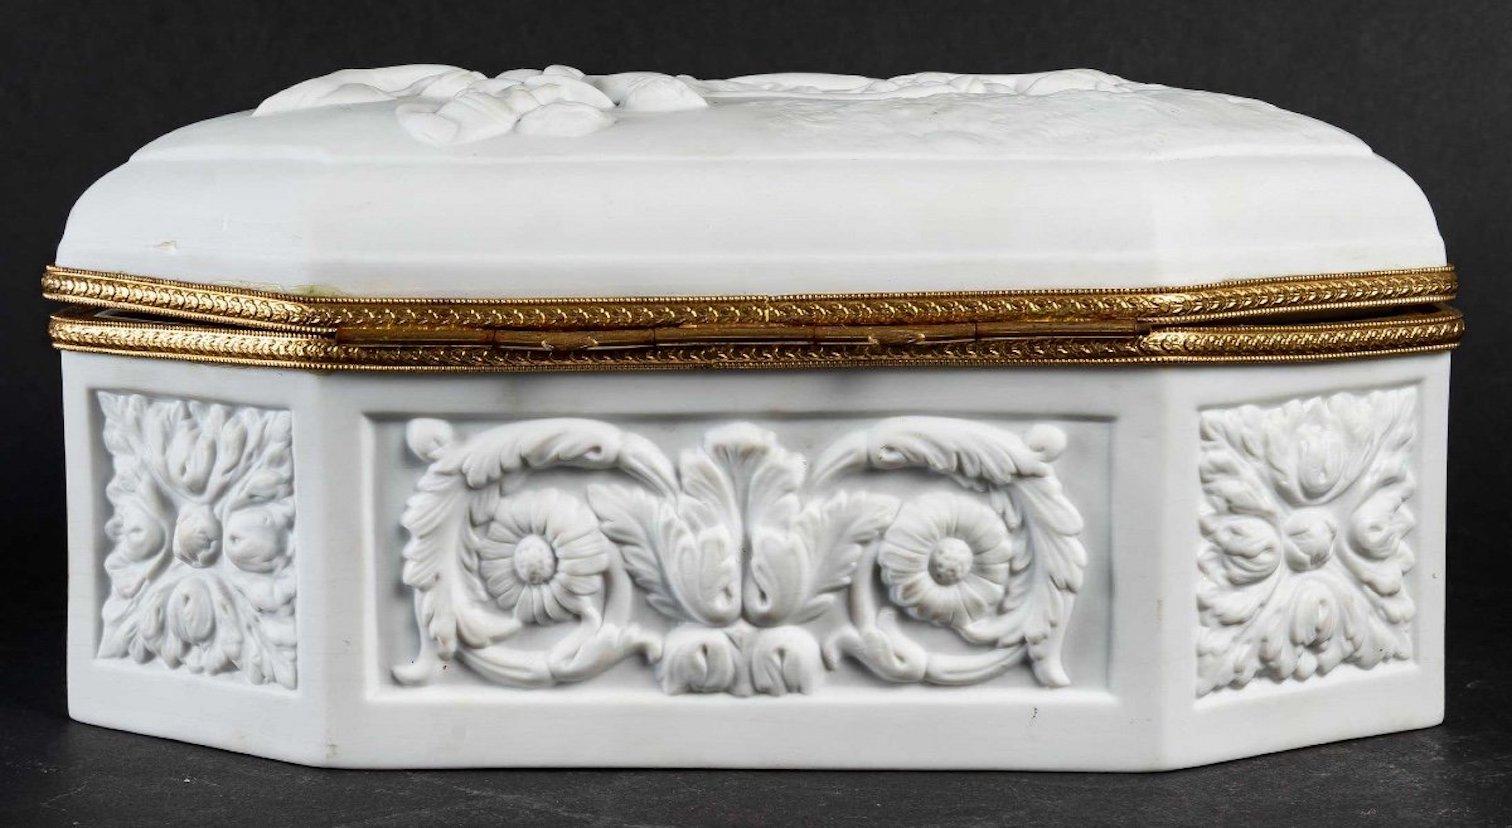 Porcelain Limoges Biscuit Jewelry Box End of XIXth Century